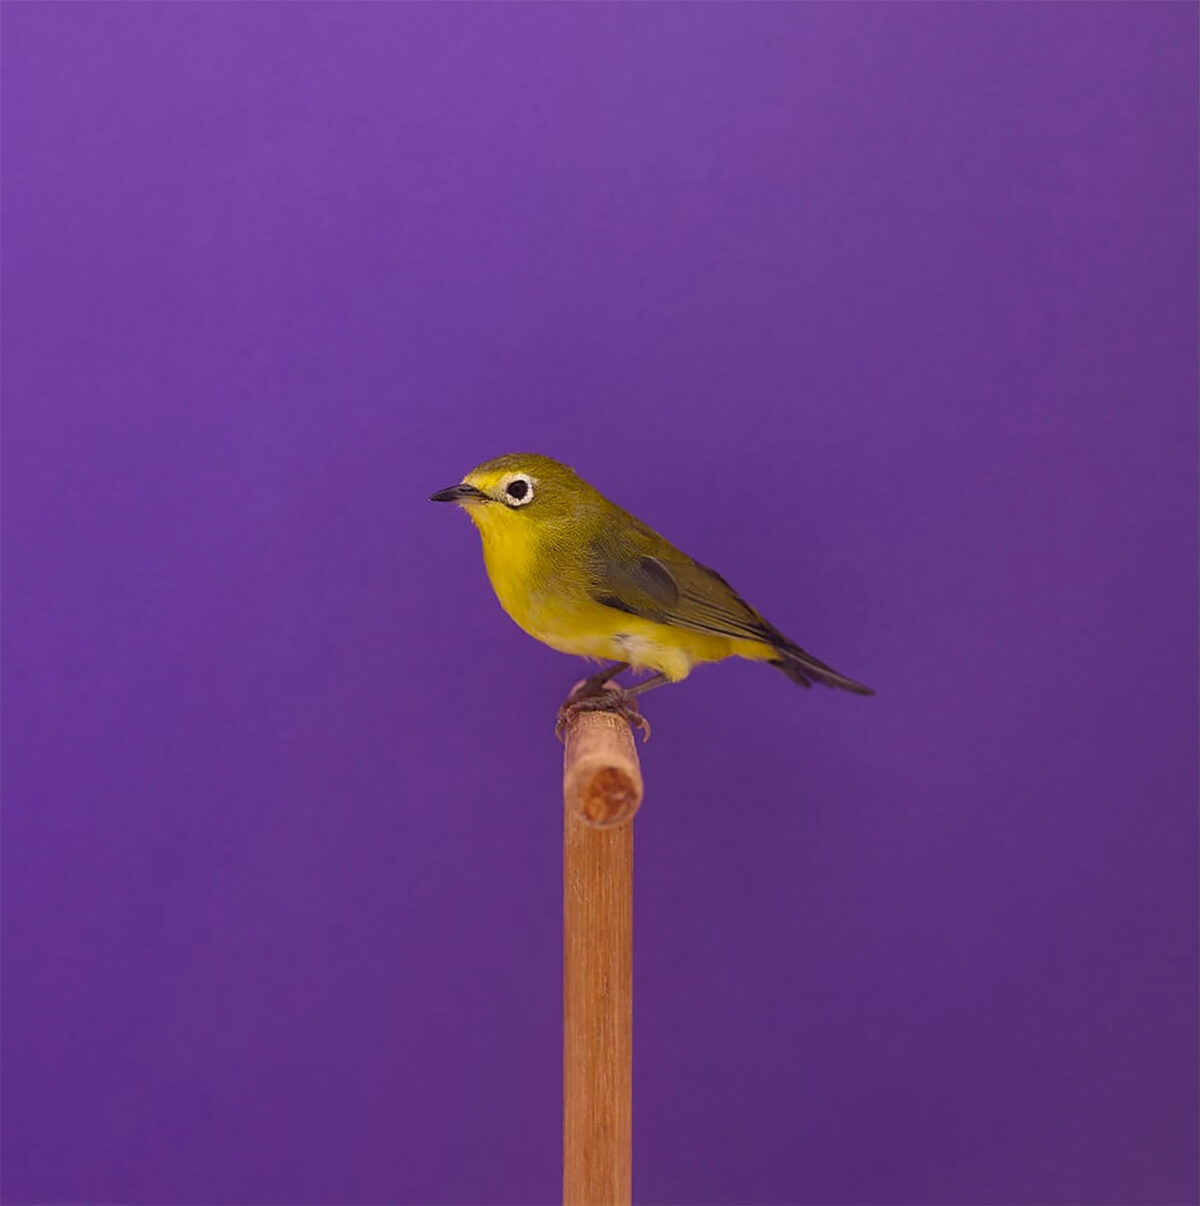 An Incomplete Dictionary Of Show Birds A Minimalist Bird Photography Series By Luke Stephenson (20)